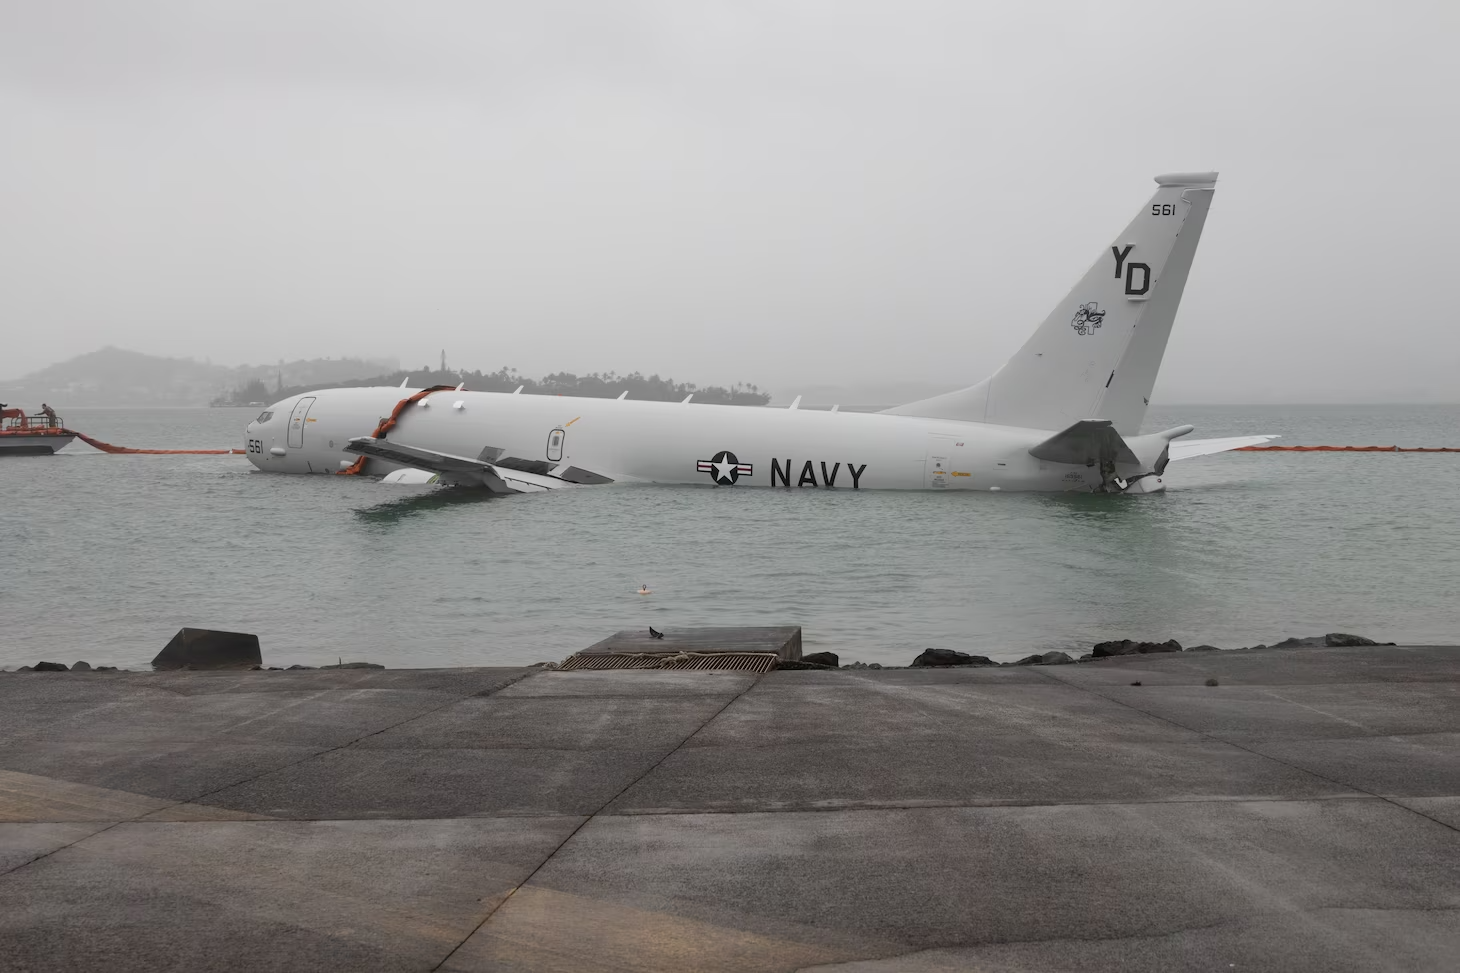 timelapse video shows us navy salvaging spy plane from hawaii waters